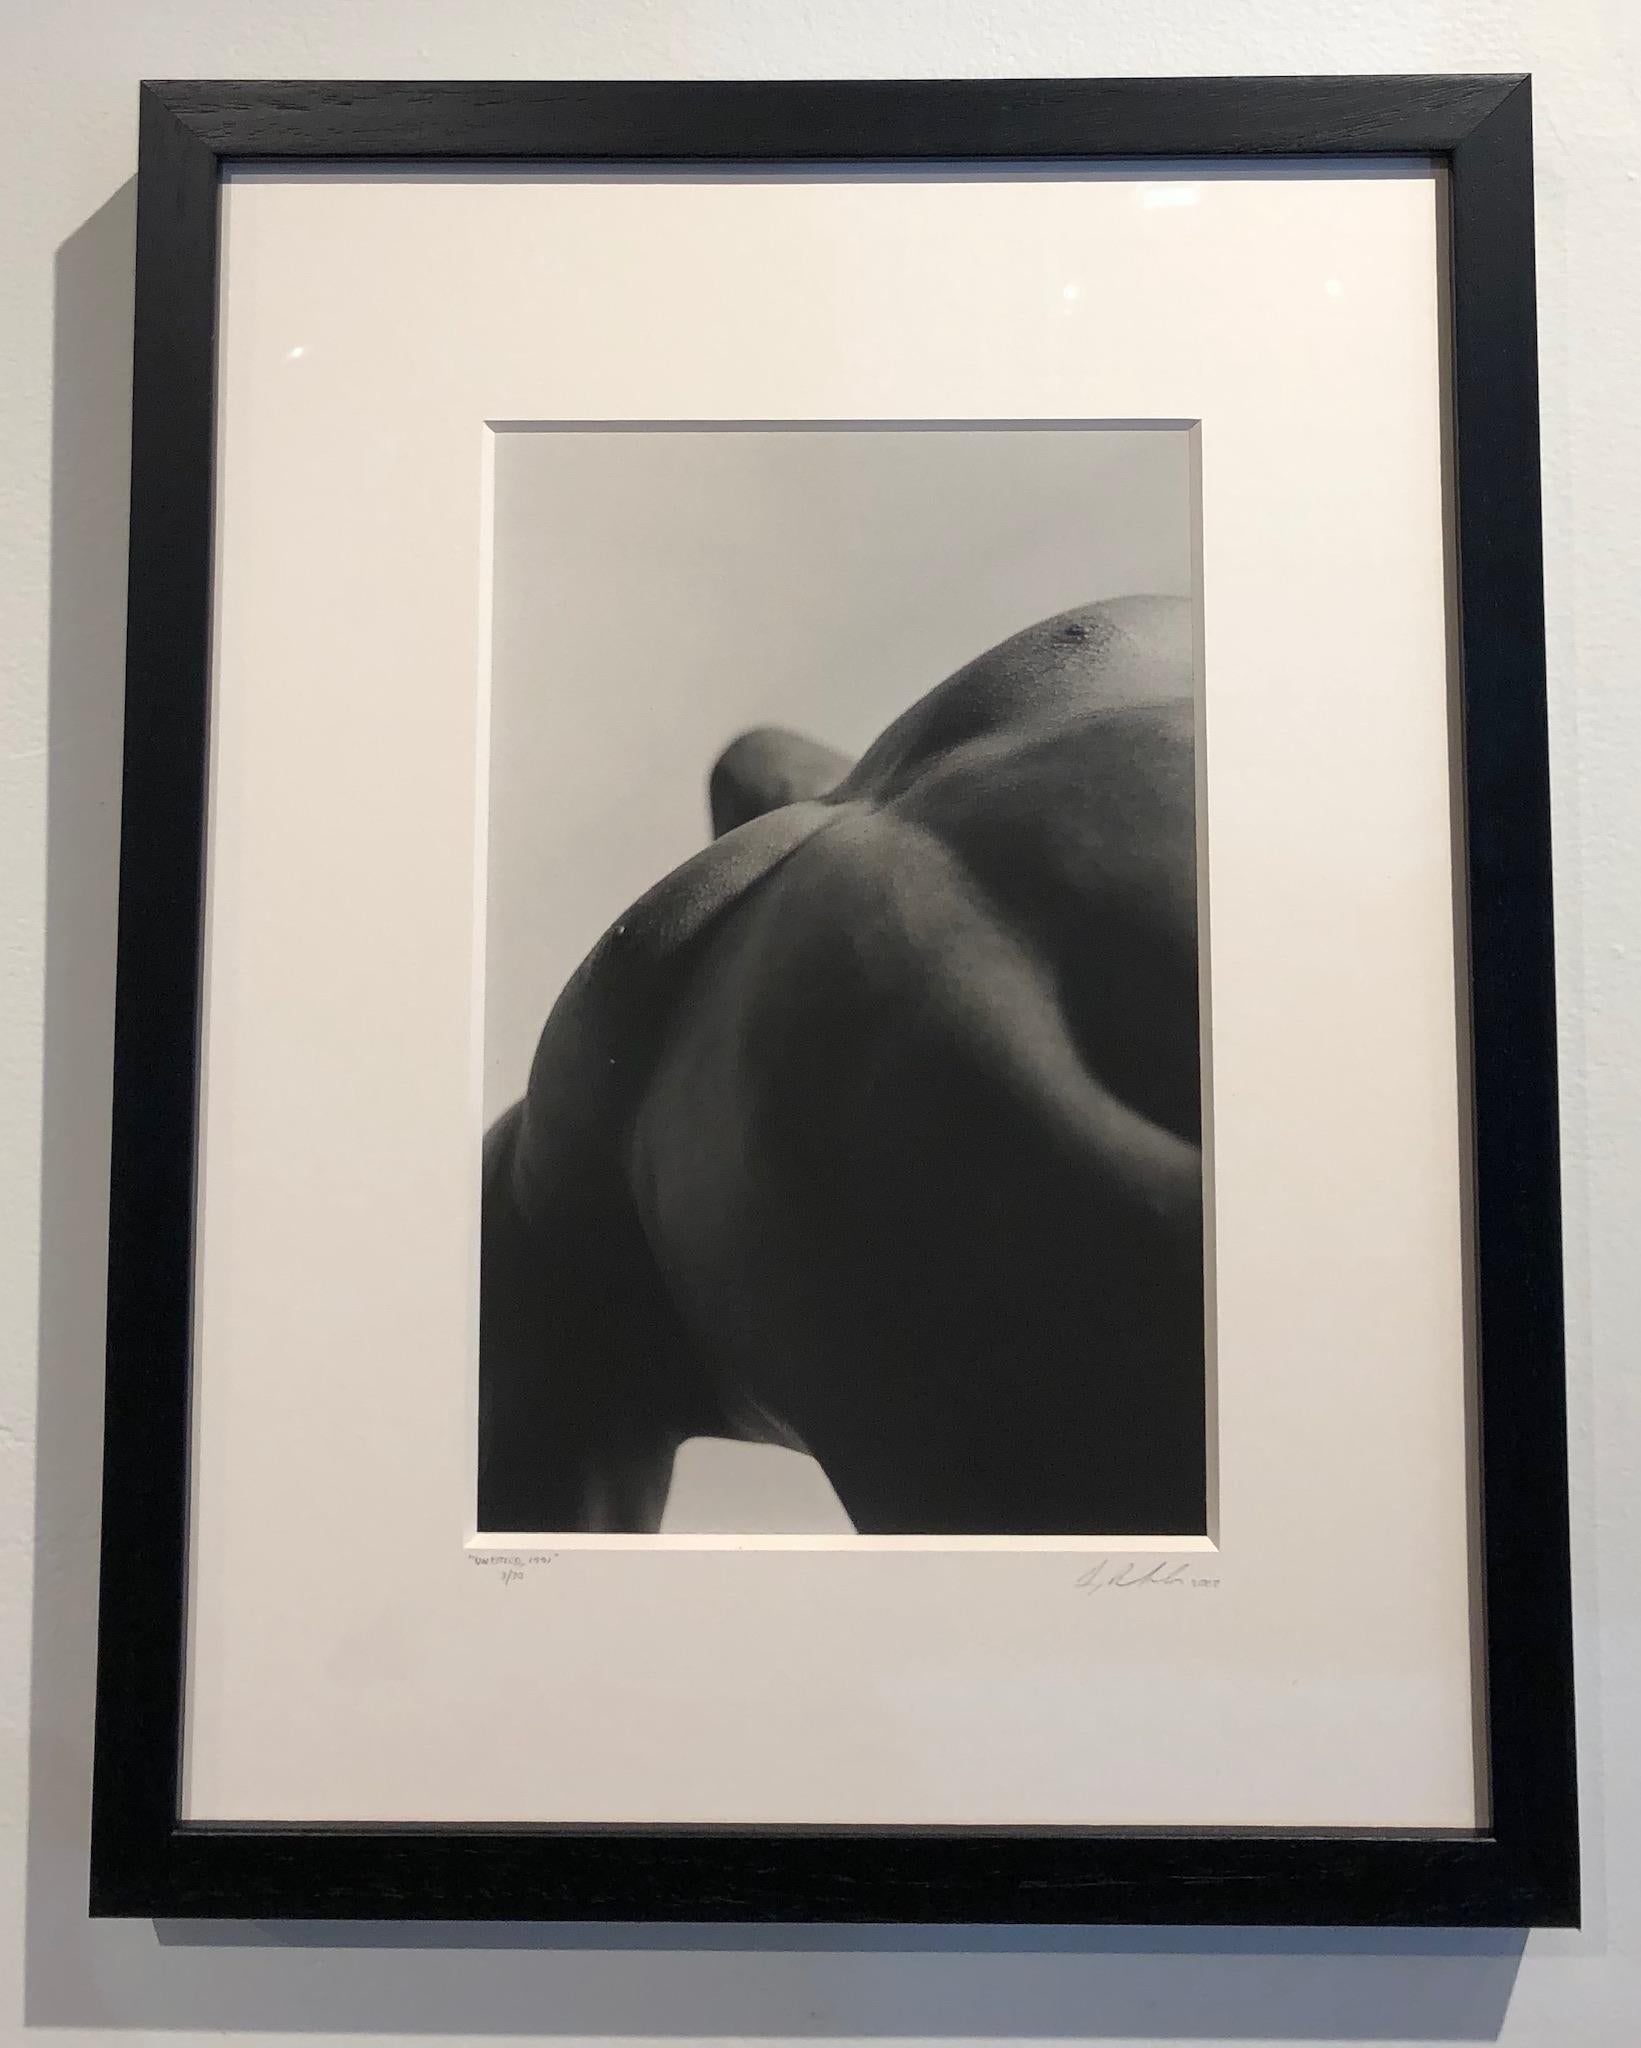 The unconventional angle of this nude torso adds to its intimacy.  The photograph is matted and framed.

Doug Birkenheuer
Untitled (Torso)
silver gelatin print
17.5h x 13w inches, framed
3/30
DOB005

Birkenheuer received his Associates Degree from